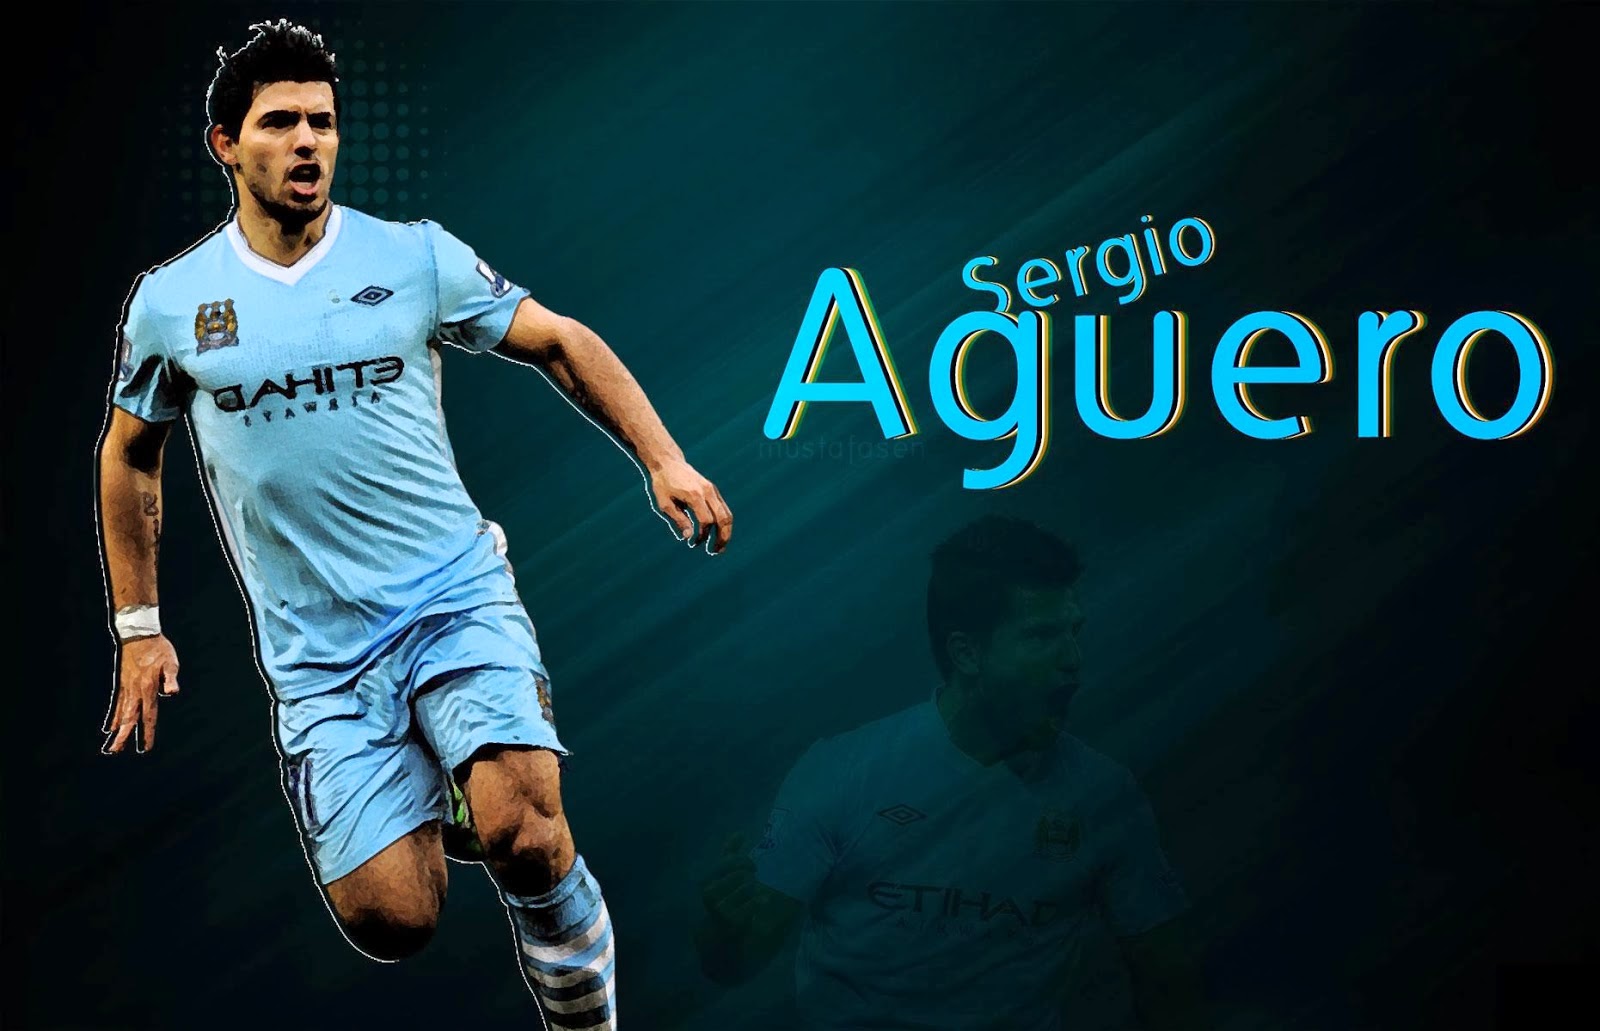 Download Sergio Aguero Wallpapers In Hd For Desktop - Aguero Images Download , HD Wallpaper & Backgrounds